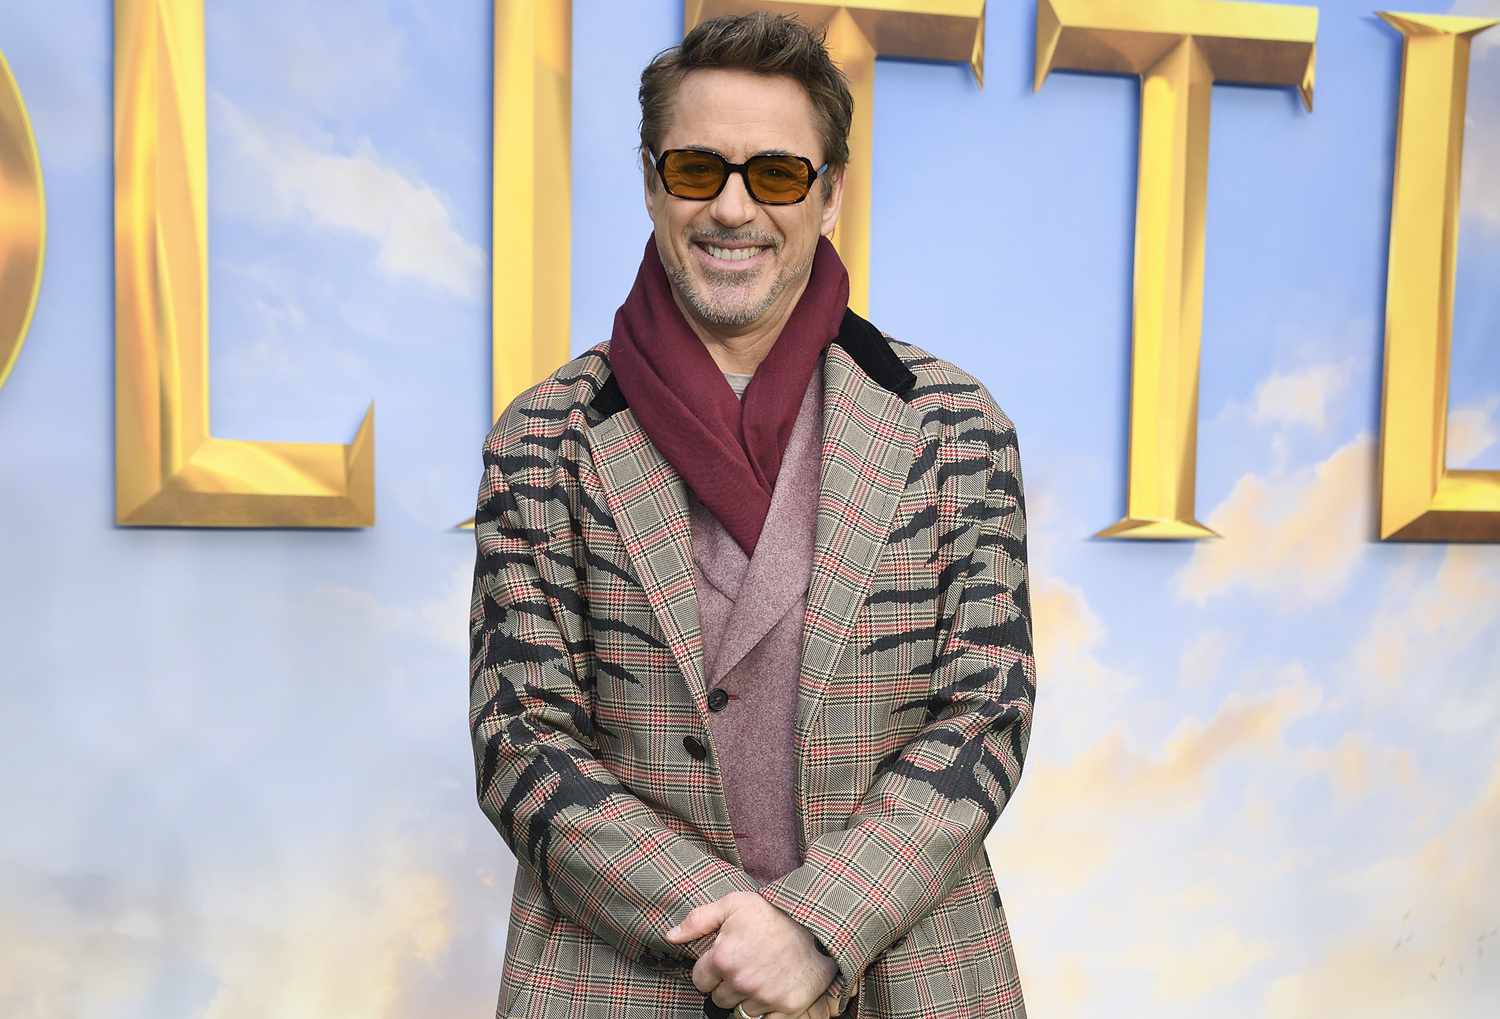 Robert Downey Jr. at the Dolittle special screening at Cineworld Leicester Square in London, England on Jan. 25, 2020